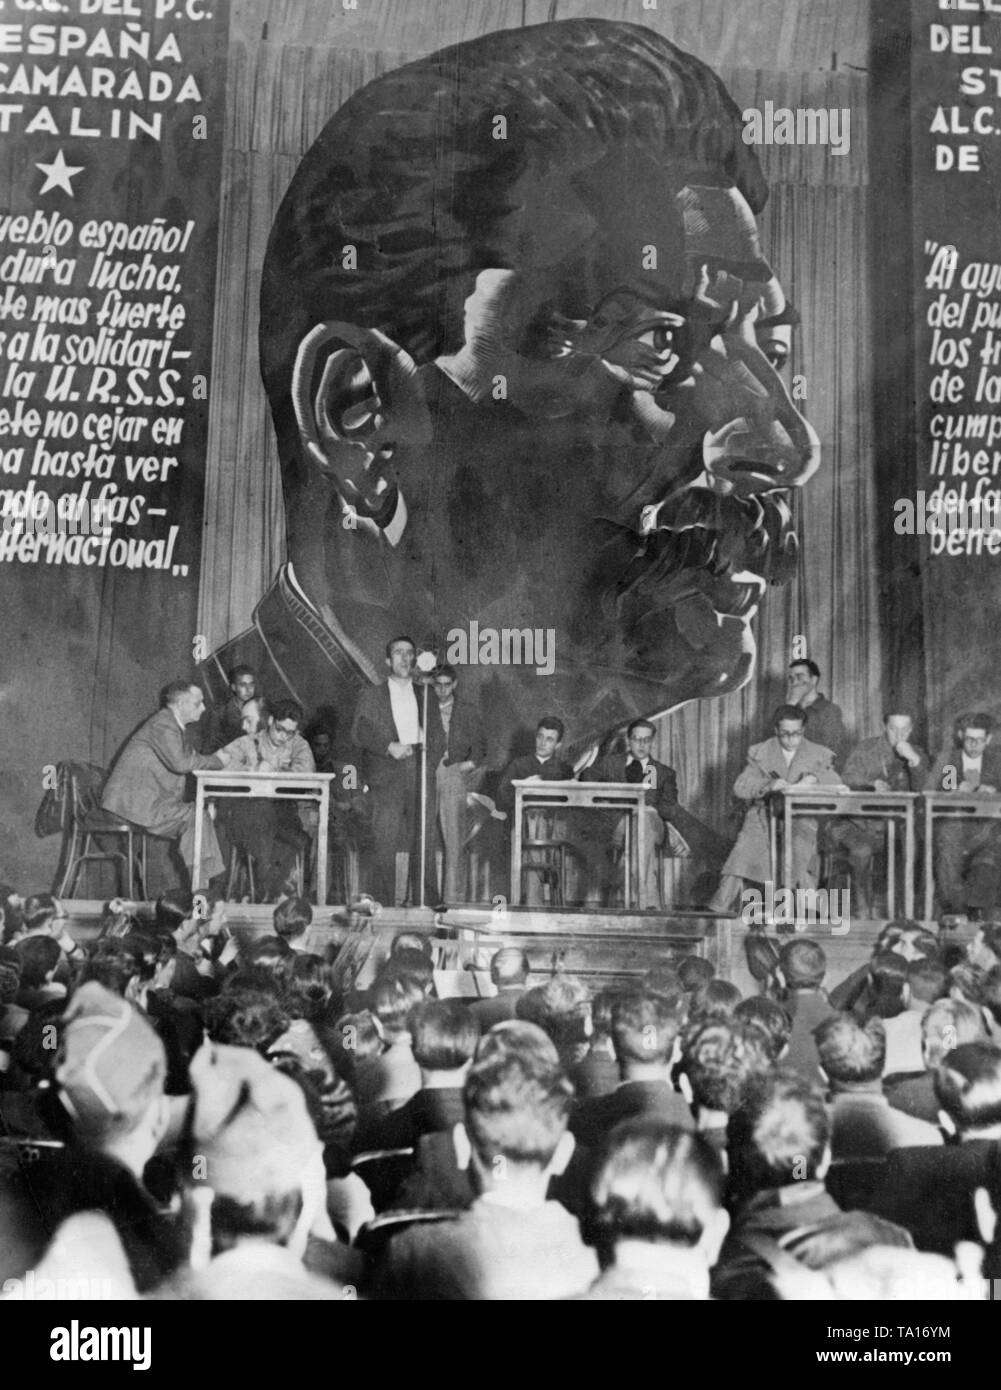 At an event of the Spanish Communist Party (Partido Comunista de Espana) in Madrid during the siege of the city. Stalin's portrait was supposed to express the need of the troops of the republic for support by the Soviet Union. In addition to the portait, Stalin quotes translated into Spanish also express the solidarity of the Soviet Union for Spain. Stock Photo